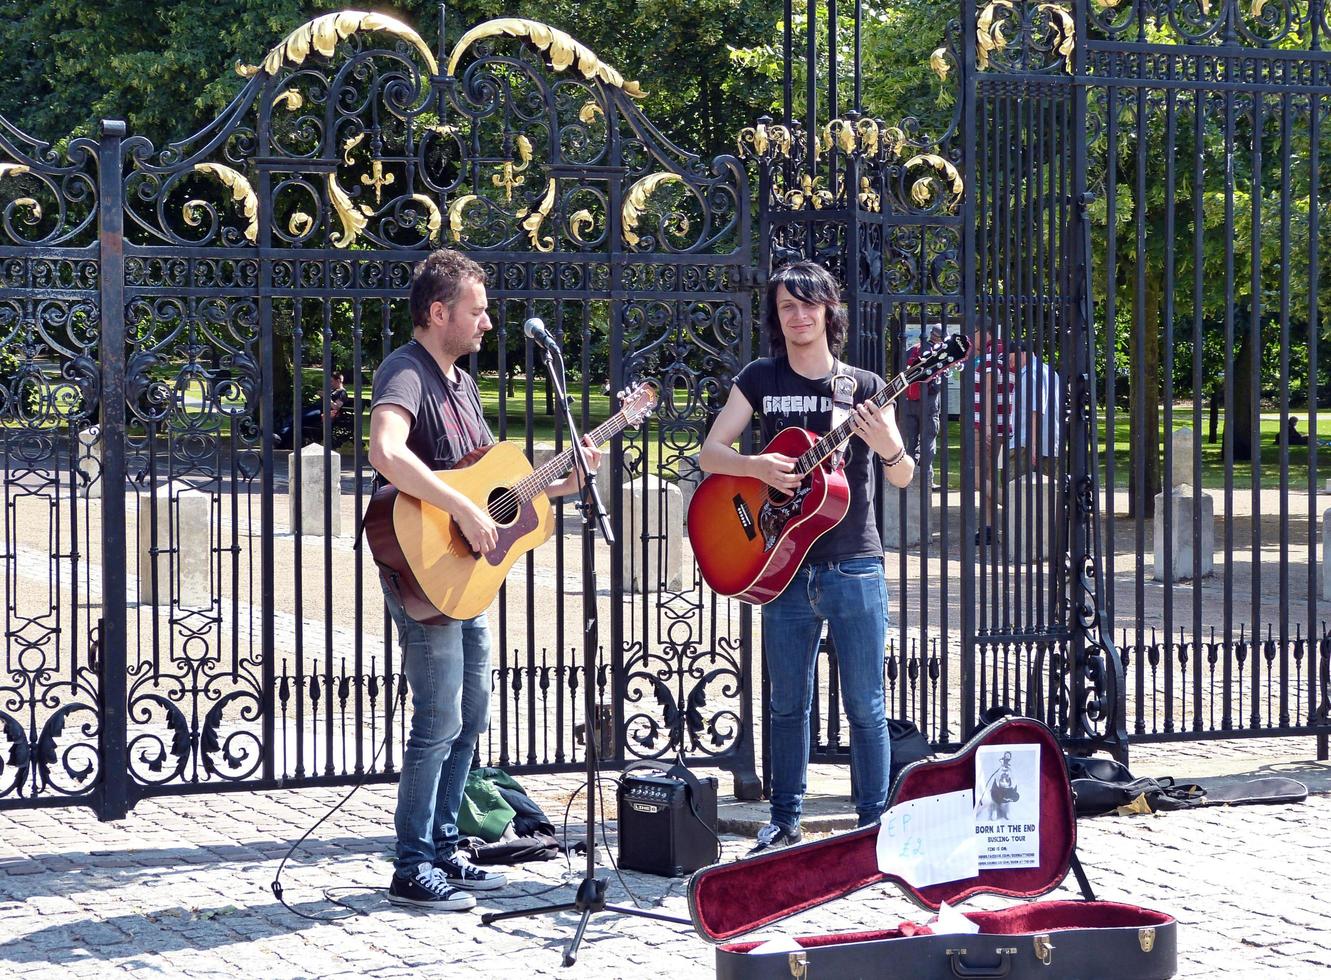 Greenwich, London, England, July 1, 2014, Young street performers playing acoustic music with guitars in the historic downtown district of Greenwich. Busking on street concept. England. photo